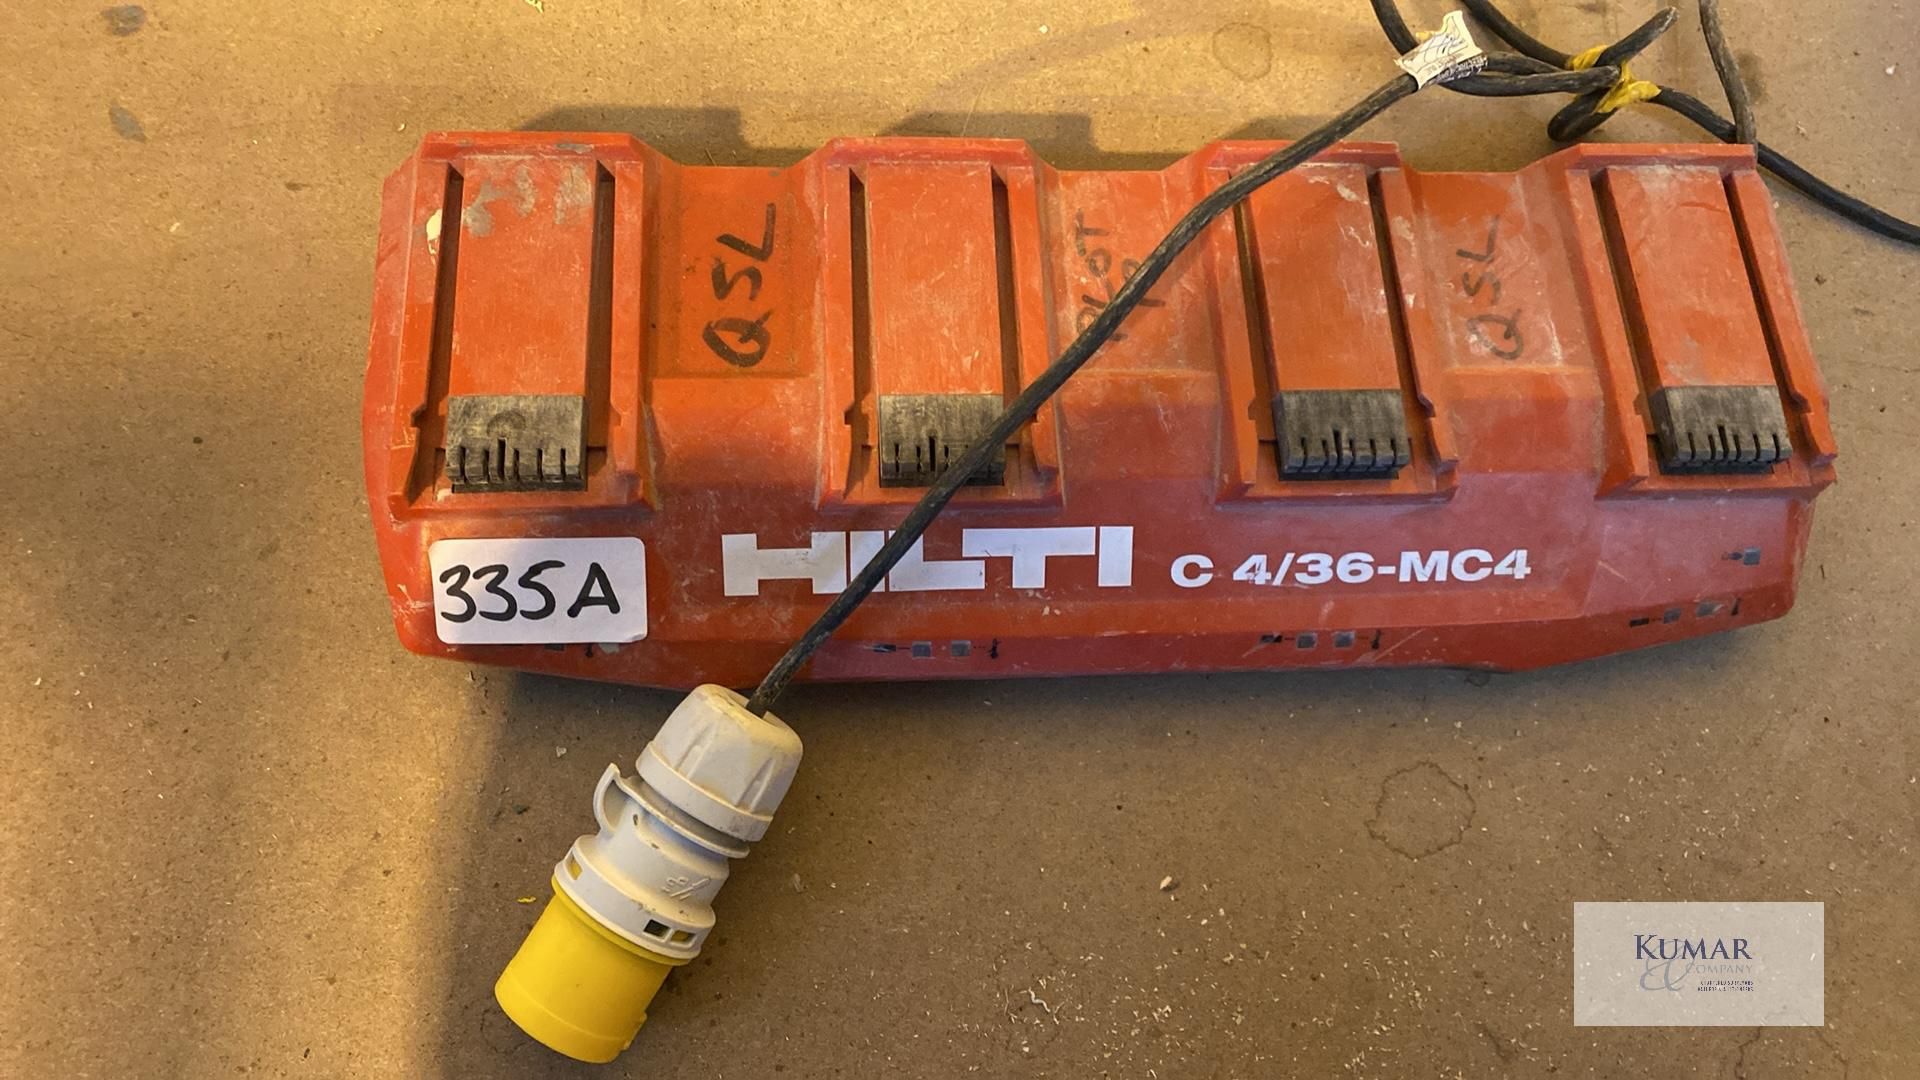 Hilti C4/36-MC4 Multi Bay 110 Volt Battery Charger, Serial No.120390005 (2019) - Image 2 of 3